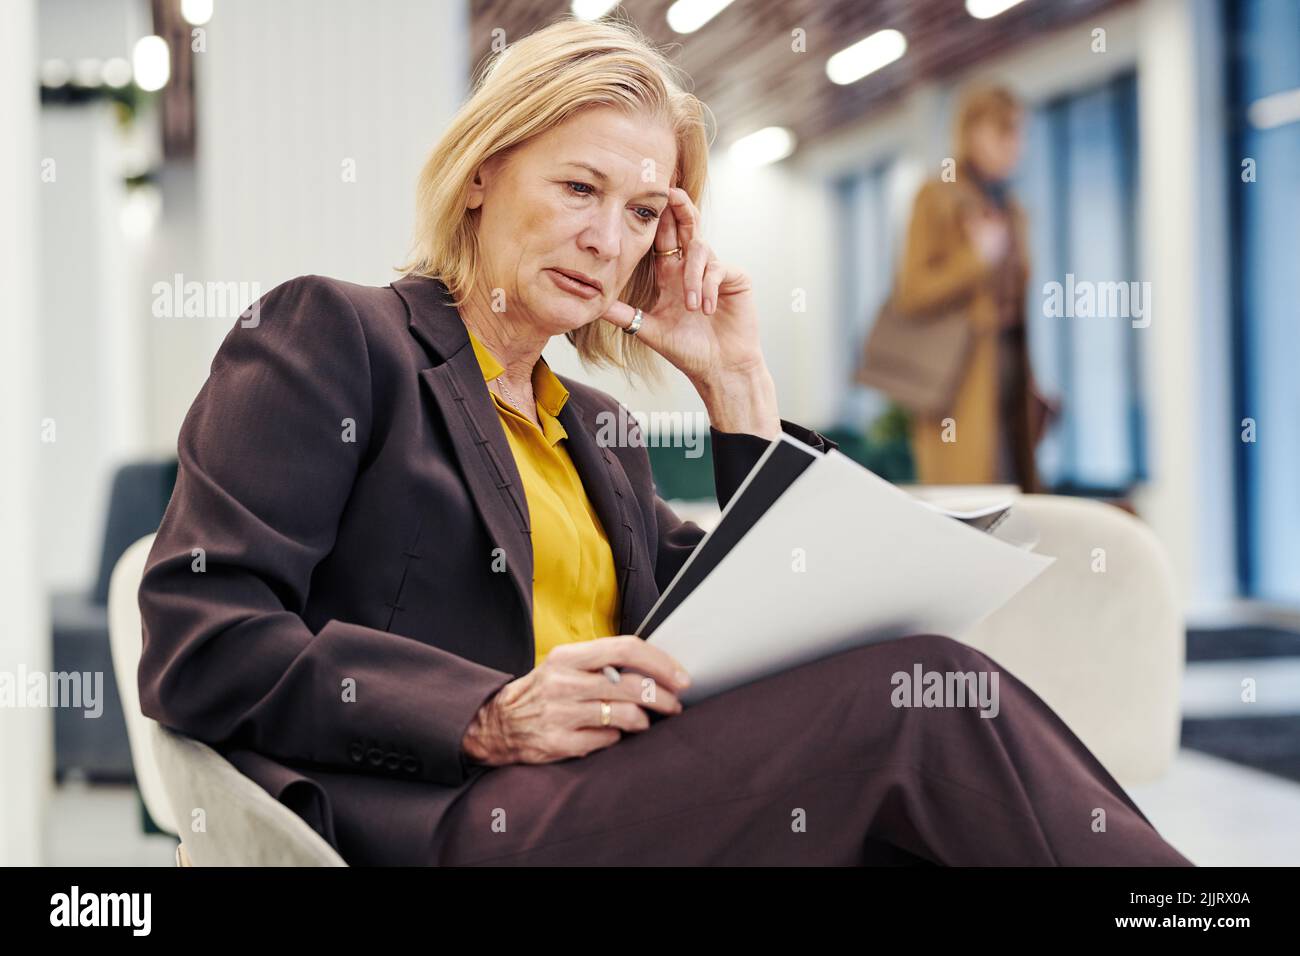 Serious female lawyer reading documents and preparing for the meeting while sitting on chair in the lobby of courthouse Stock Photo